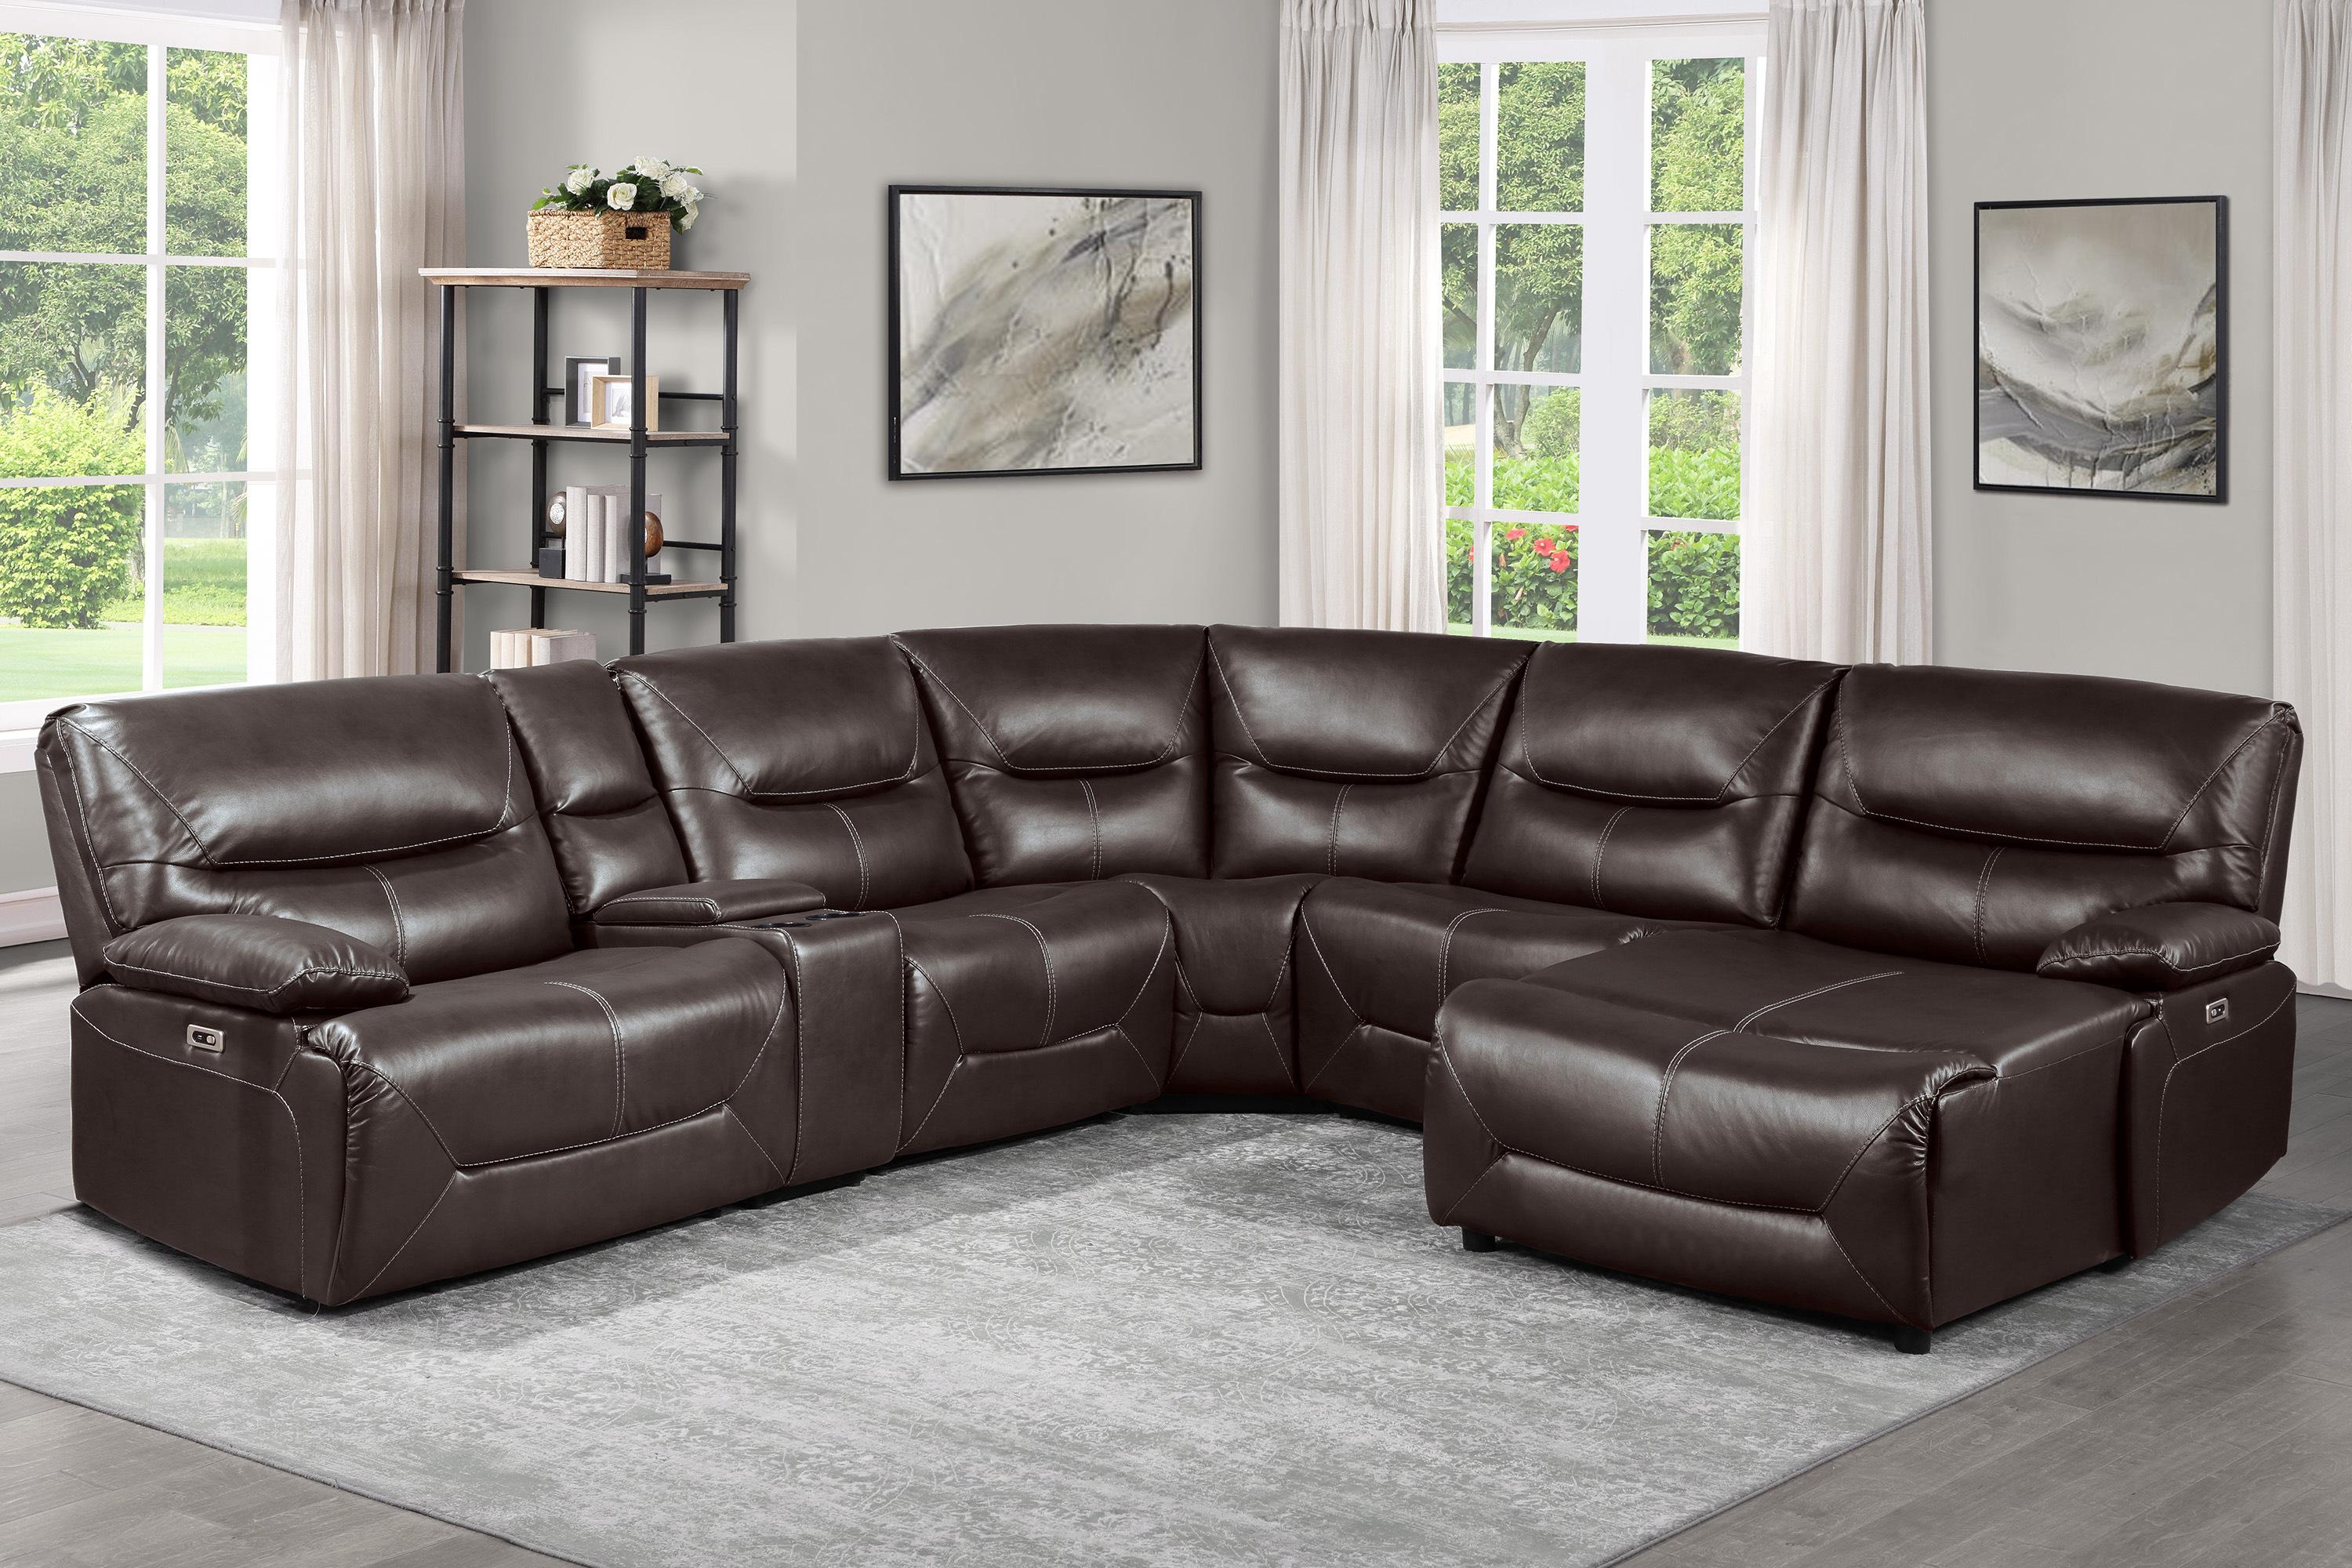 

    
Transitional Brown Faux Leather 6-Piece RSF Power Reclining Sectional Homelegance 9579BRW Dyersburg
